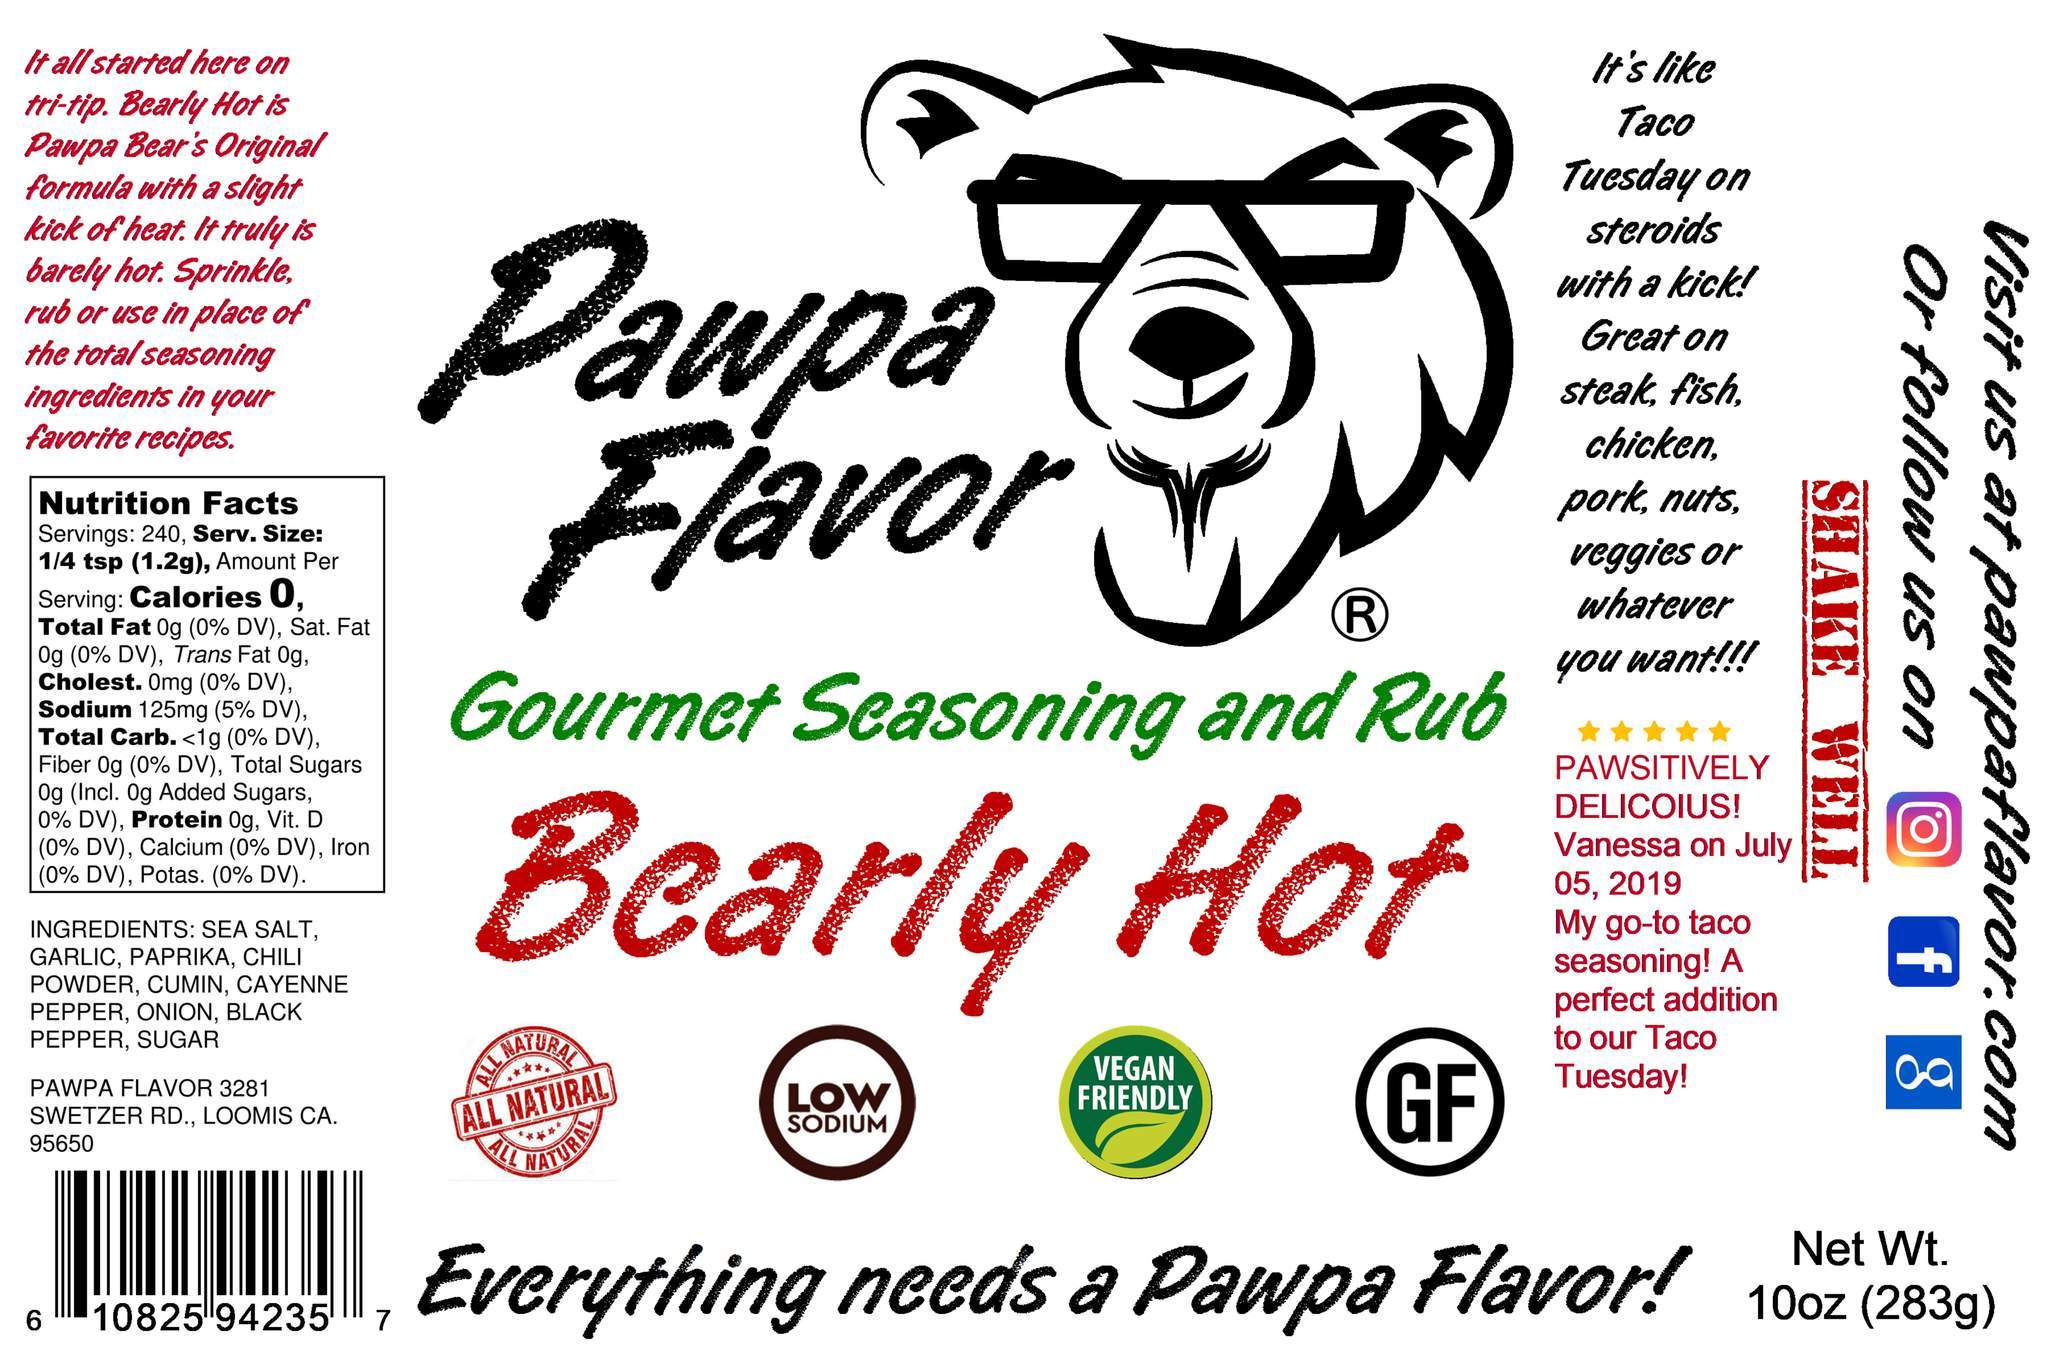 Pawpa Flavor Bearly Hot - 10oz - Pacific Flyway Supplies